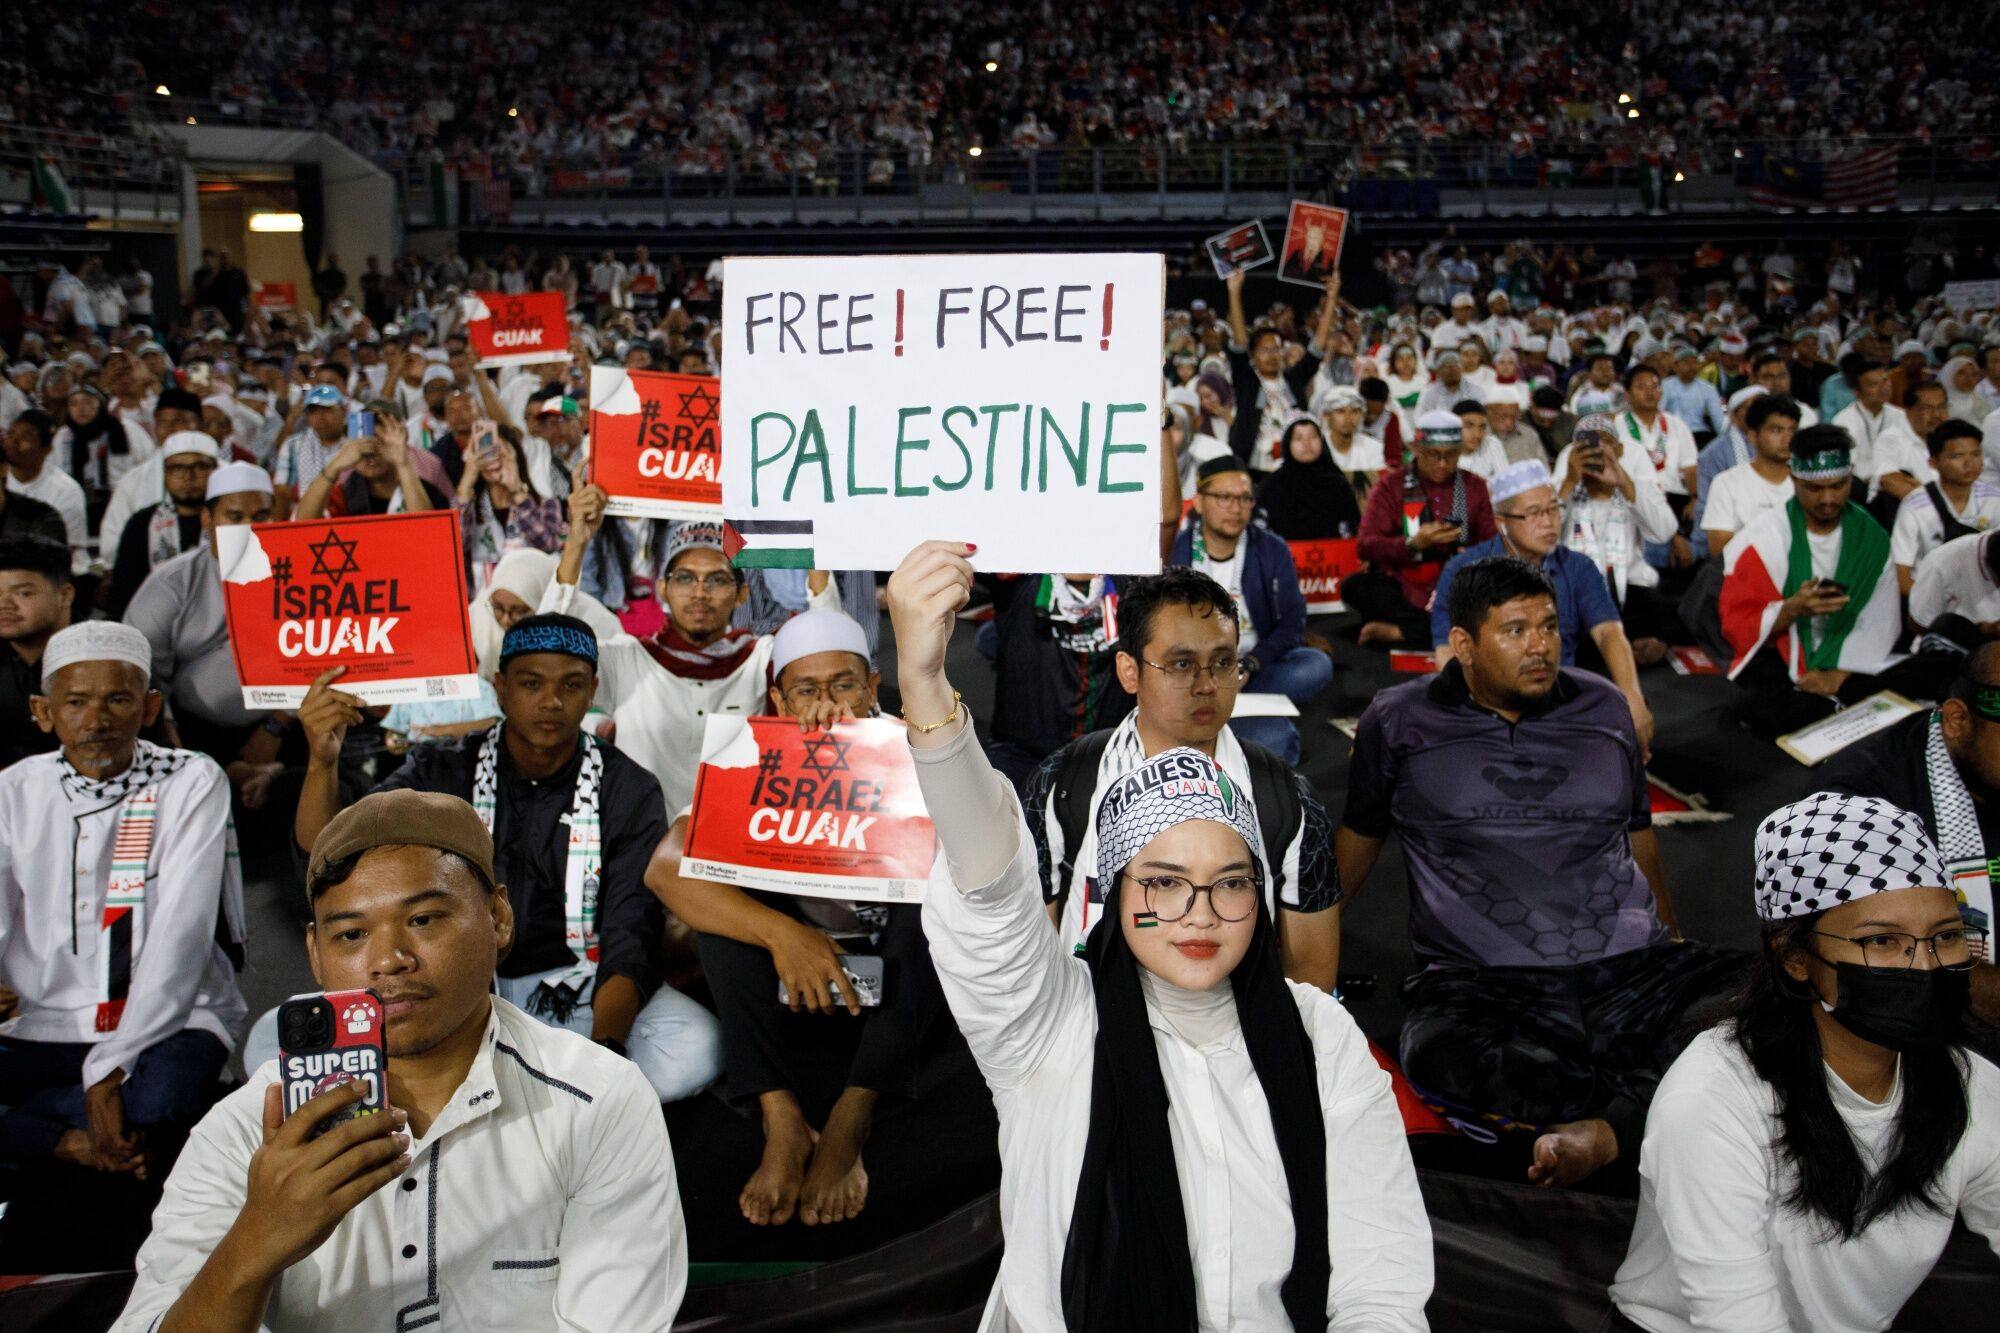 An attendee holds a “Free! Free! Palestine” sign during a pro-Palestinian rally in Kuala Lumpur, Malaysia, on Tuesday. Photo; Bloomberg